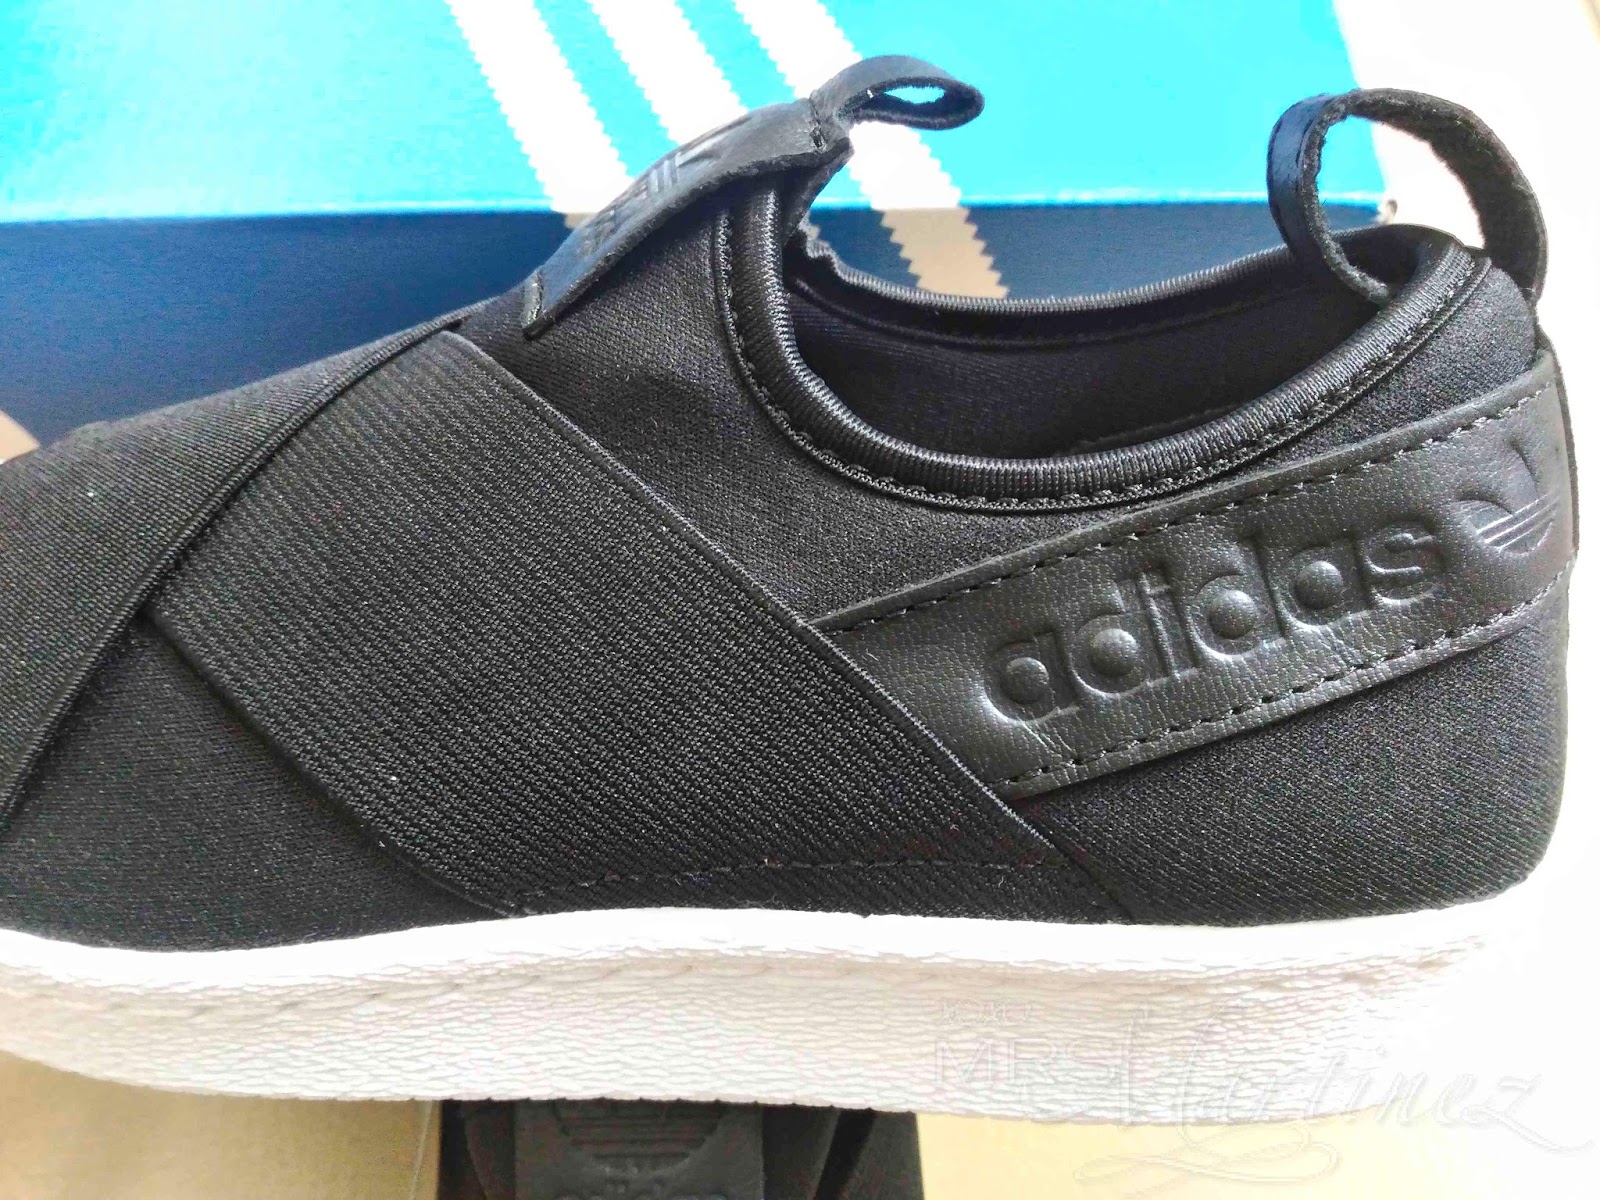 Adidas Superstar Slip-On (Black) in Ortholite | How to Spot a Fake ...